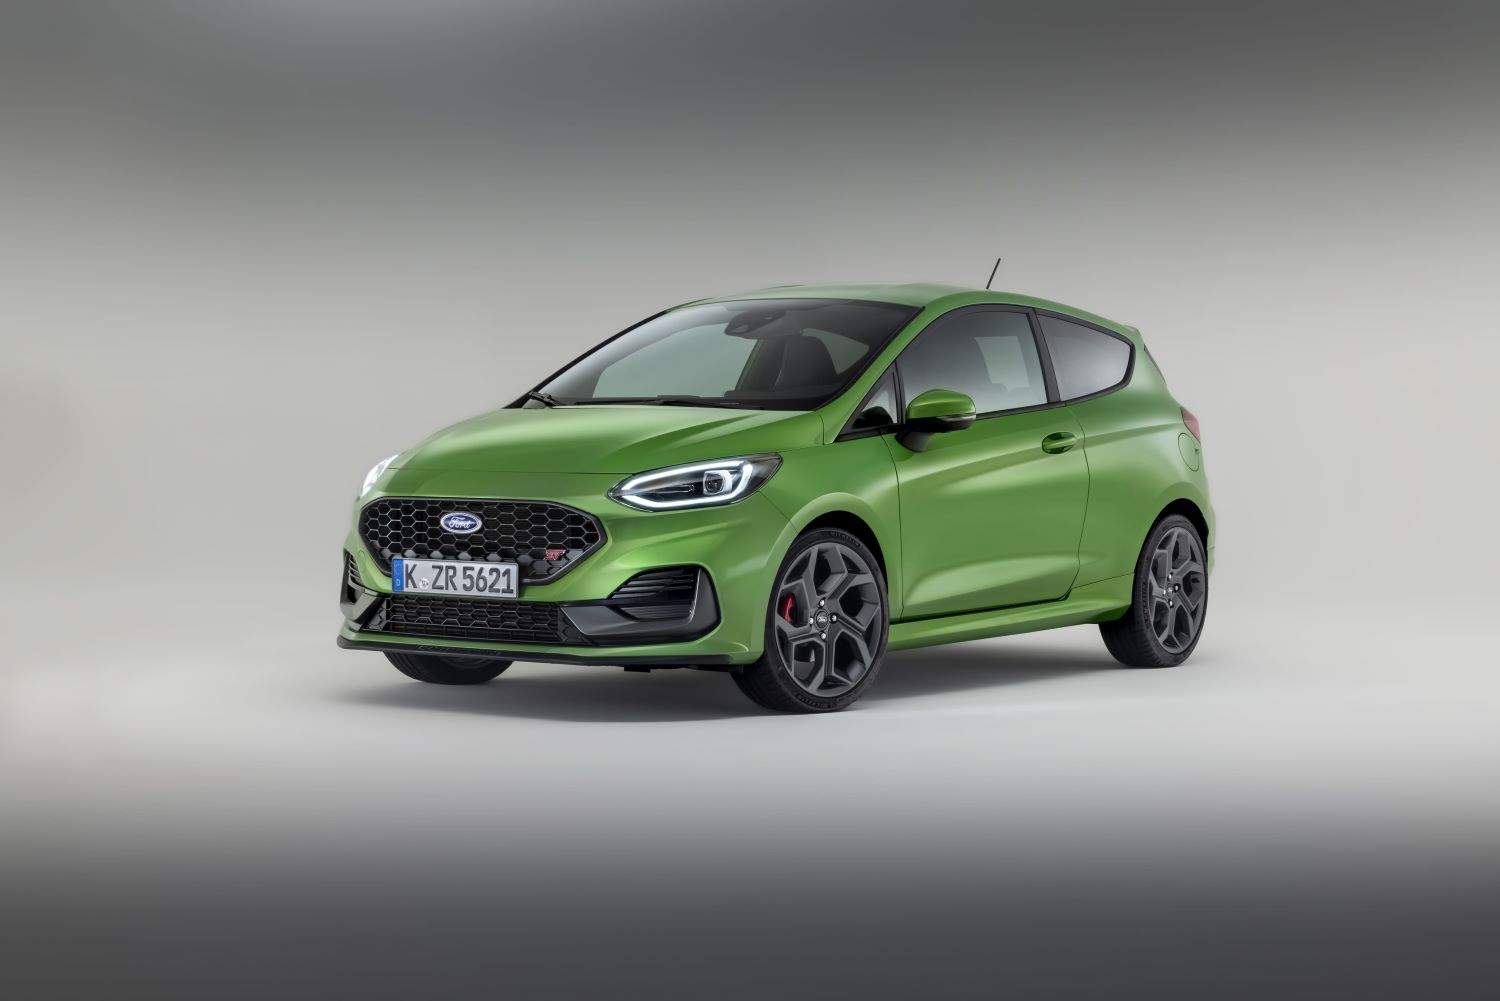 2022 Ford Fiesta debuts with new design, enhanced features and more power